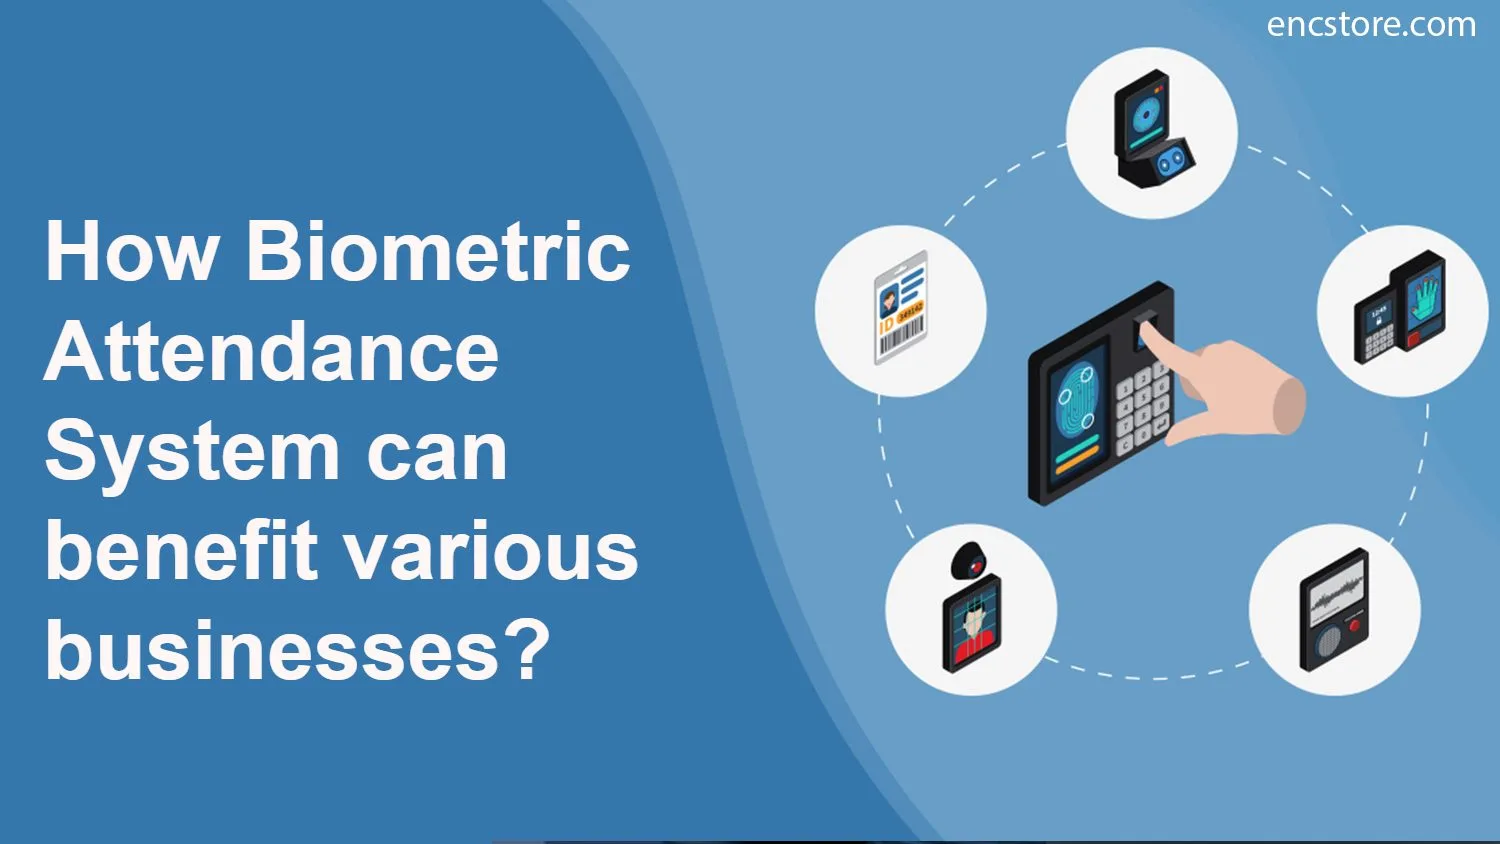 How Biometric Attendance System can benefit various businesses